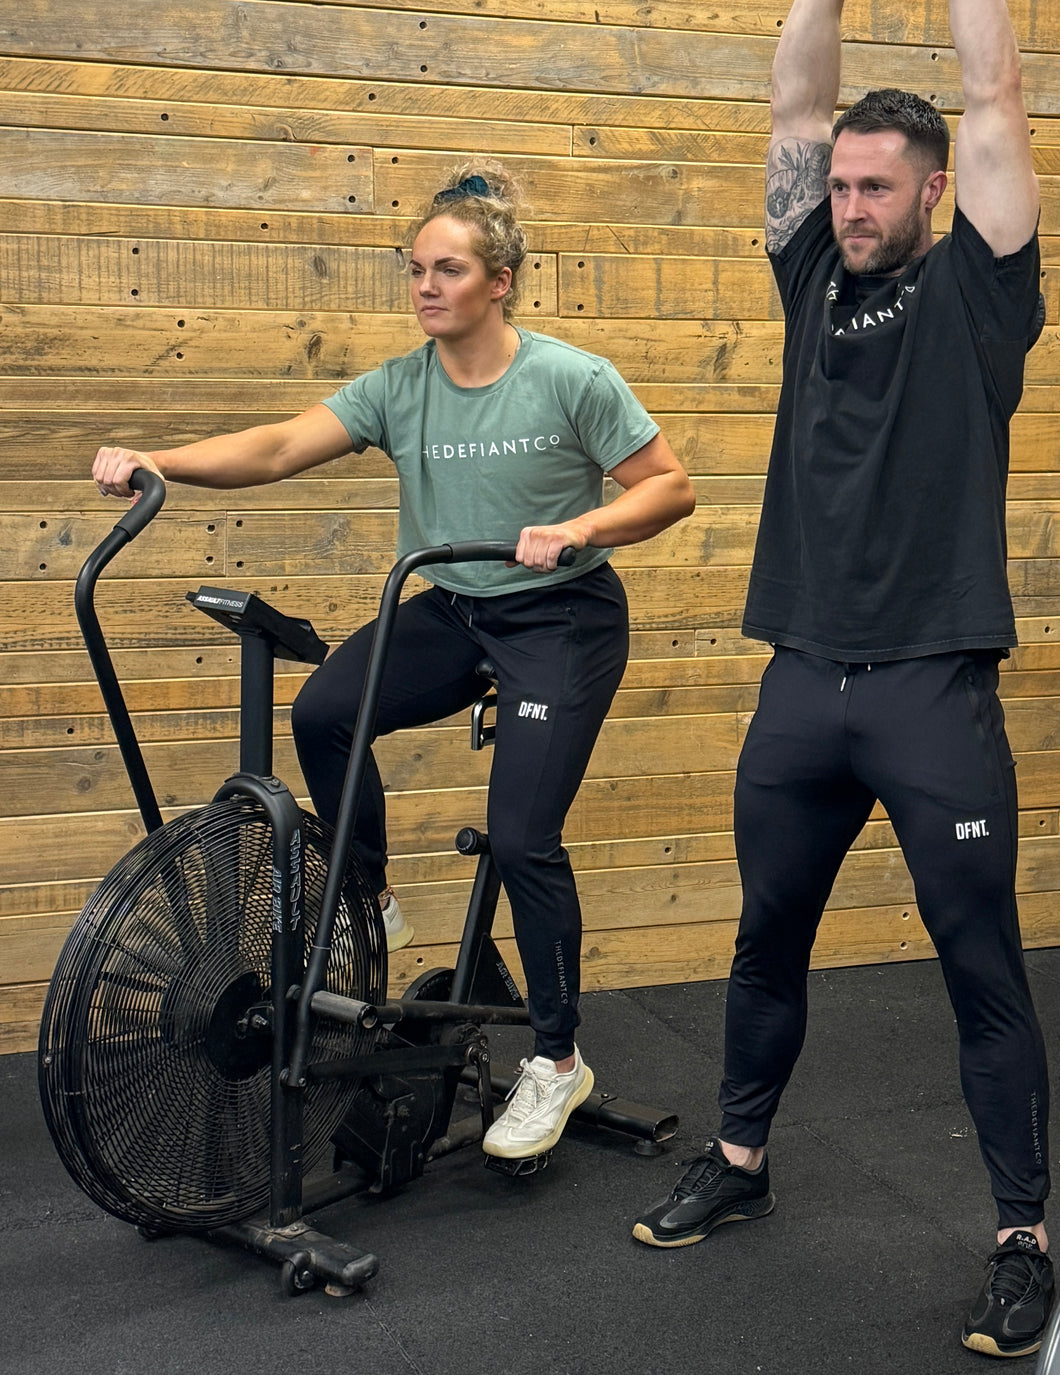 A girl and a guy in the gym wearing the amazing DFNT. Performance Joggers.  The girl sits on and Assault Bike while the guy performs a kettle bell swing.  The joggers have a DFNT. logo min raised rubber that sits on the left quad and The Defiant Co screen printed in a subtle grey tracking down the left lower shin.  The joggers have two zip pockets on either leg and have an elasticated and draw string waistband.